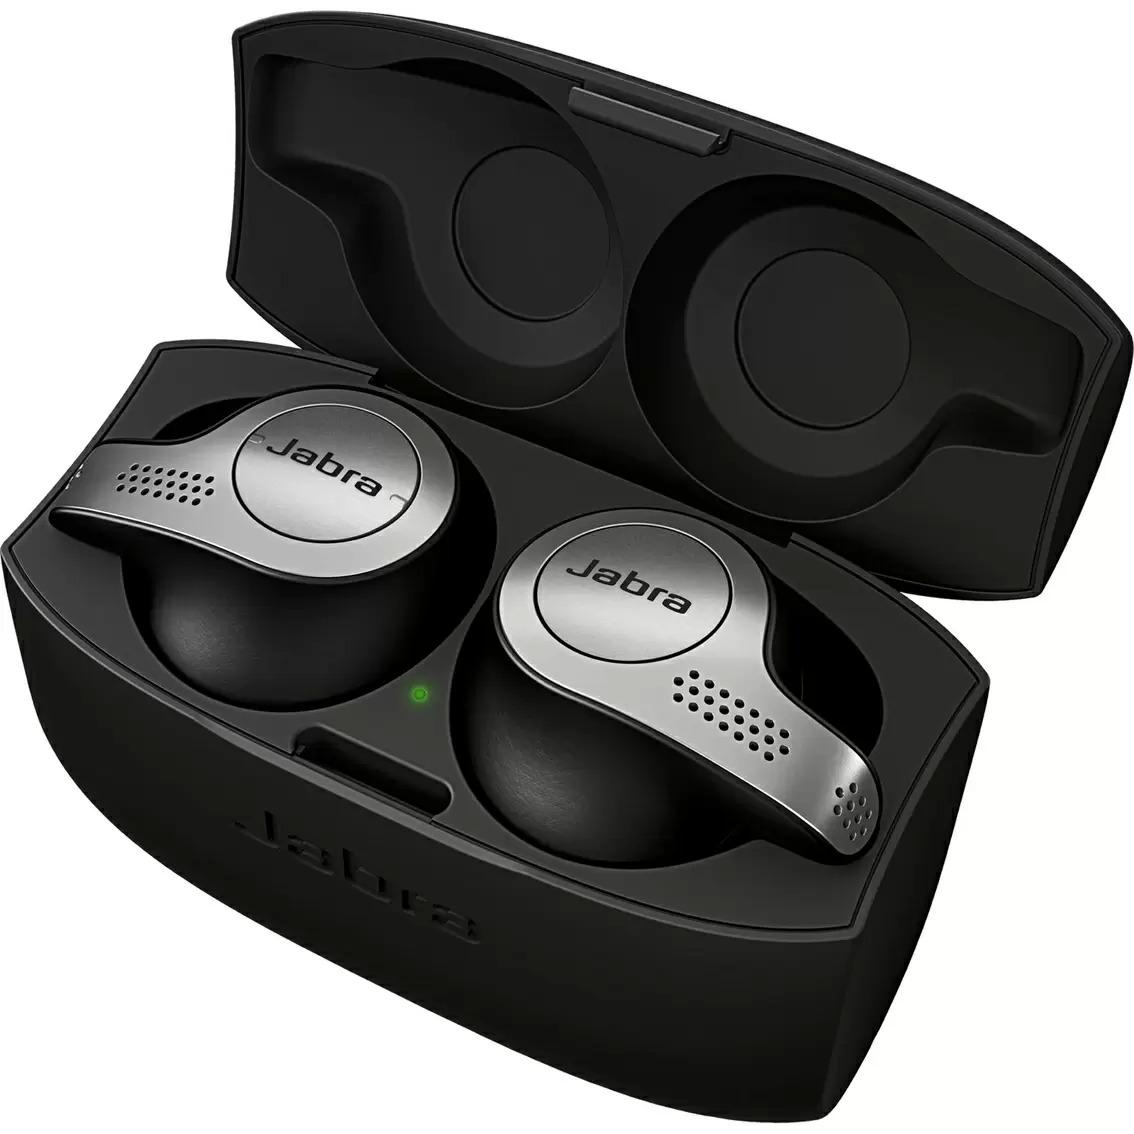 Jabra Elite Active 65t Earbuds for $59.99 Shipped